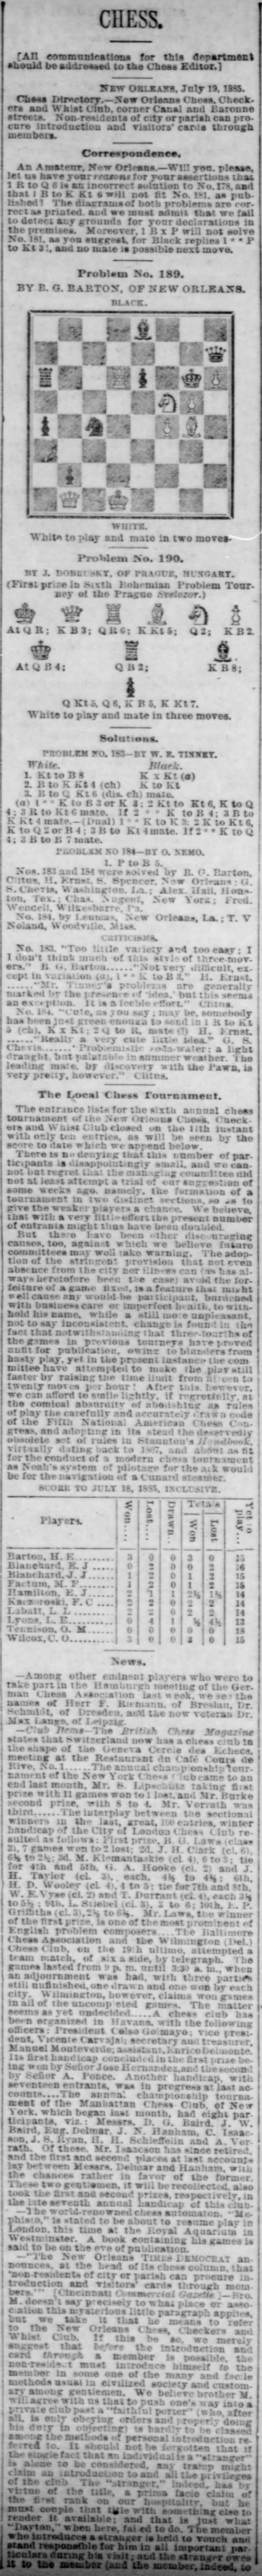 1885.07.25-01 New Orleans Weekly Times-Democrat.png